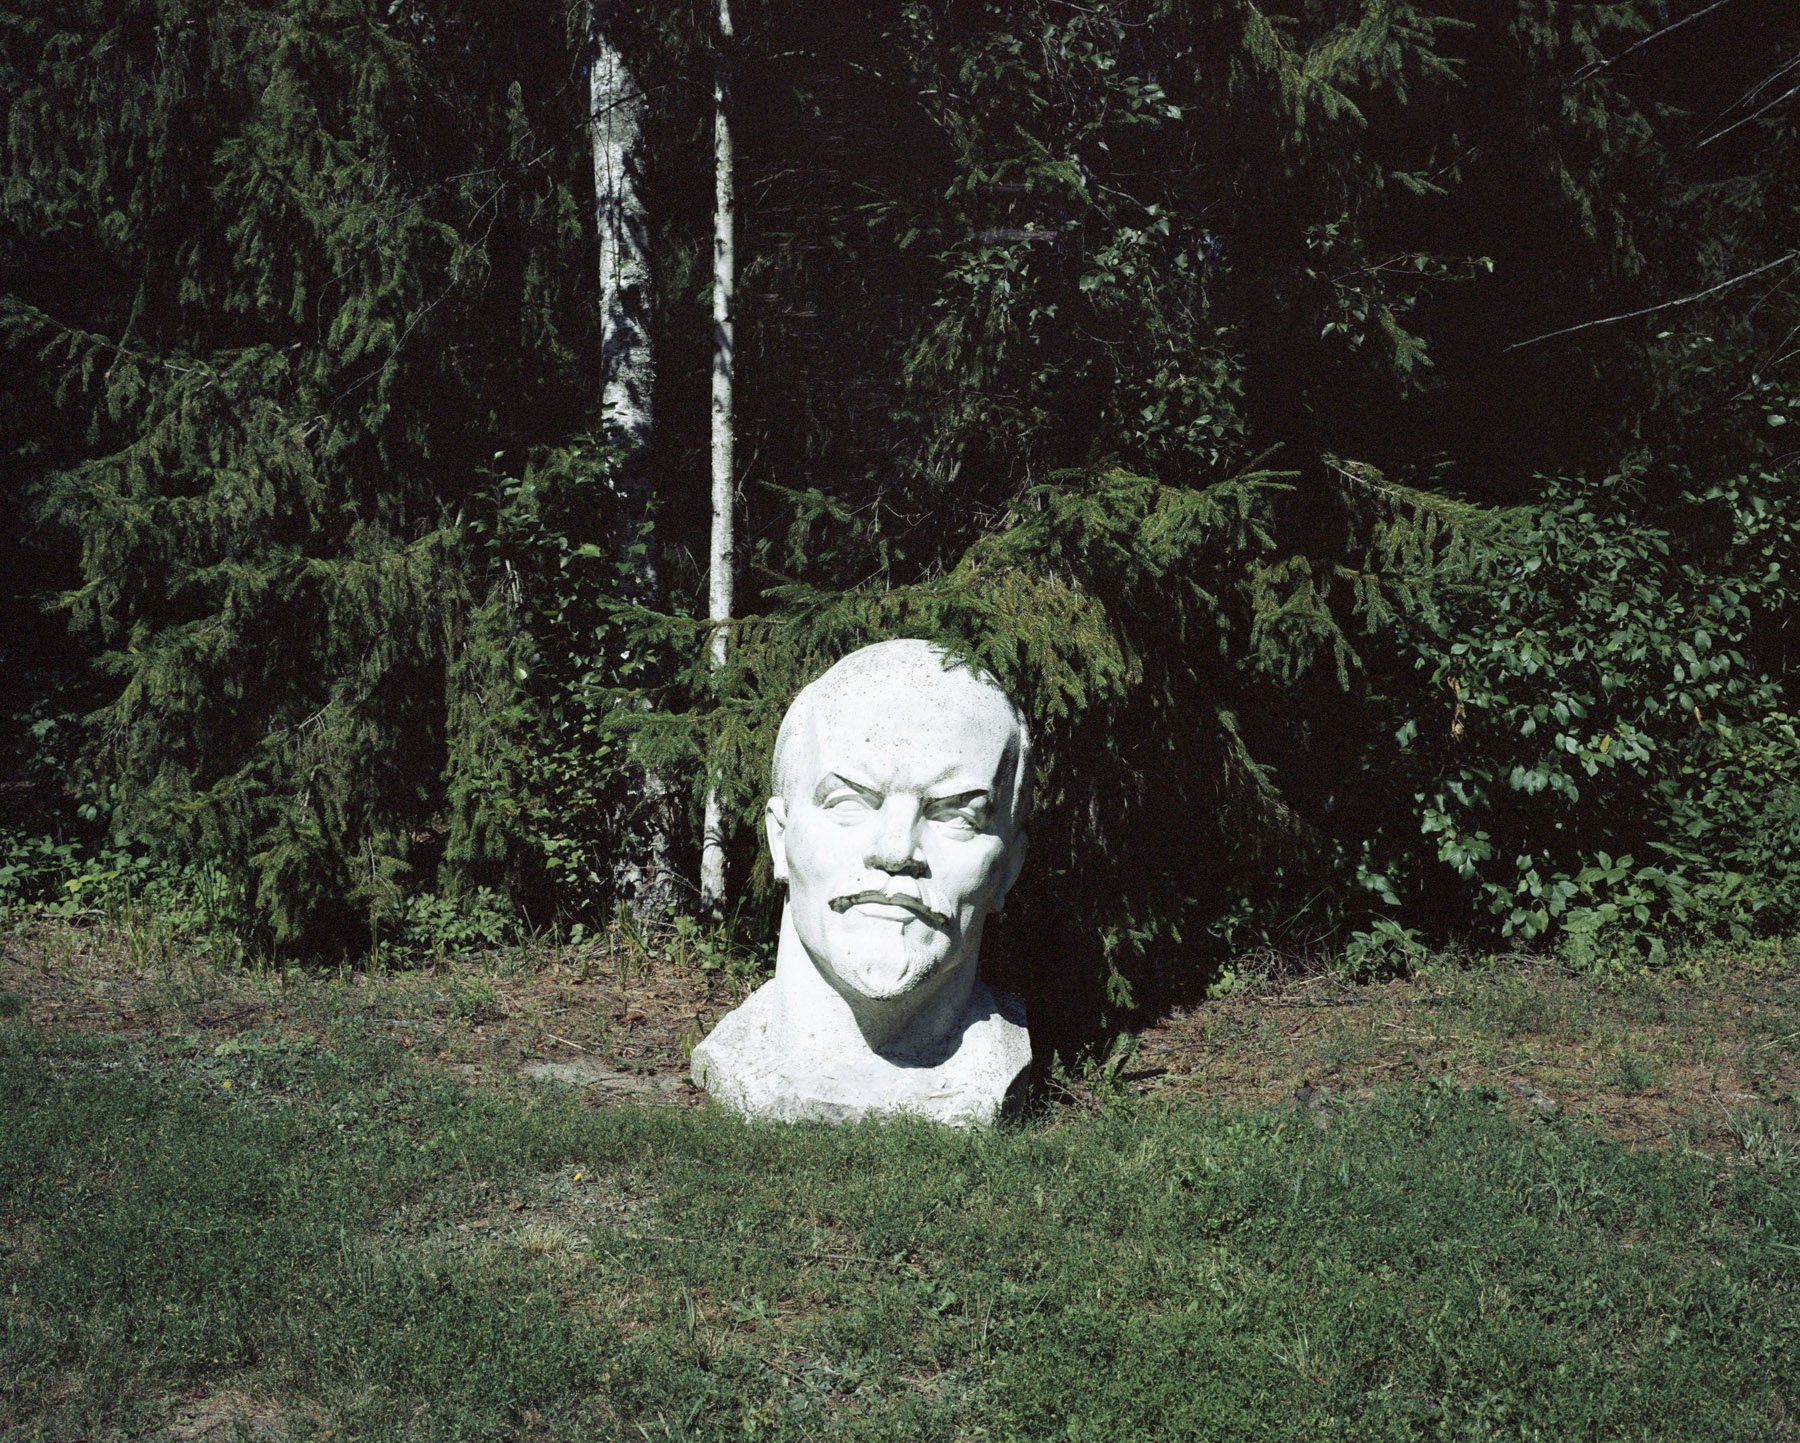  Lithuania, Druskininkai. 2020. A view of a Lenin’s statue head at the Gruto Park, a private park that showcases cultures from the Soviet era. 